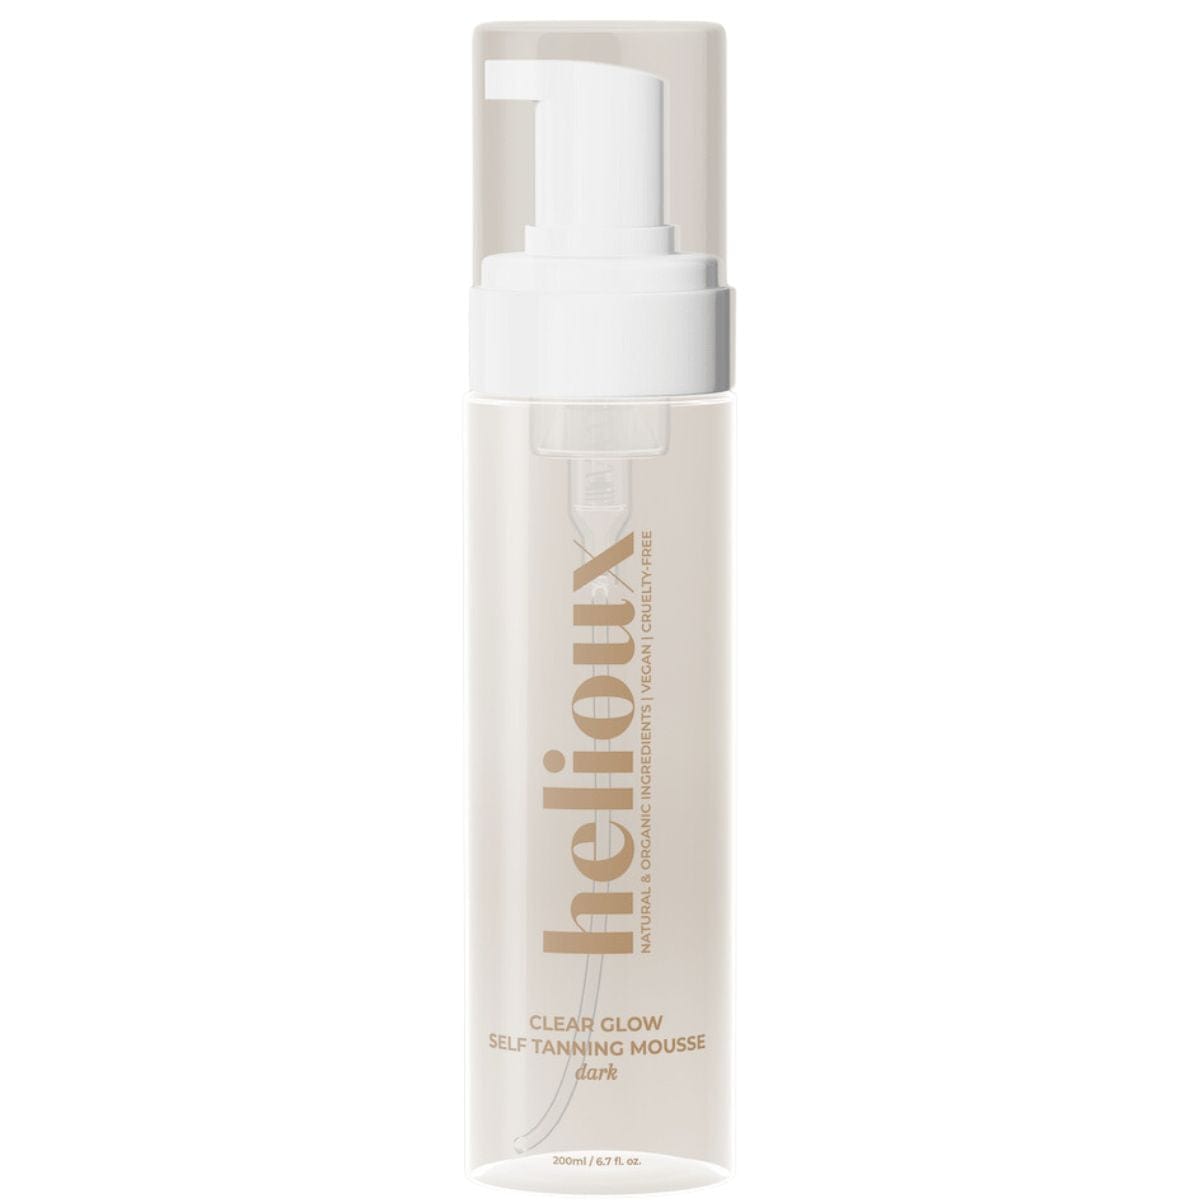 Clear Glow Self Tanning Mousse Dark